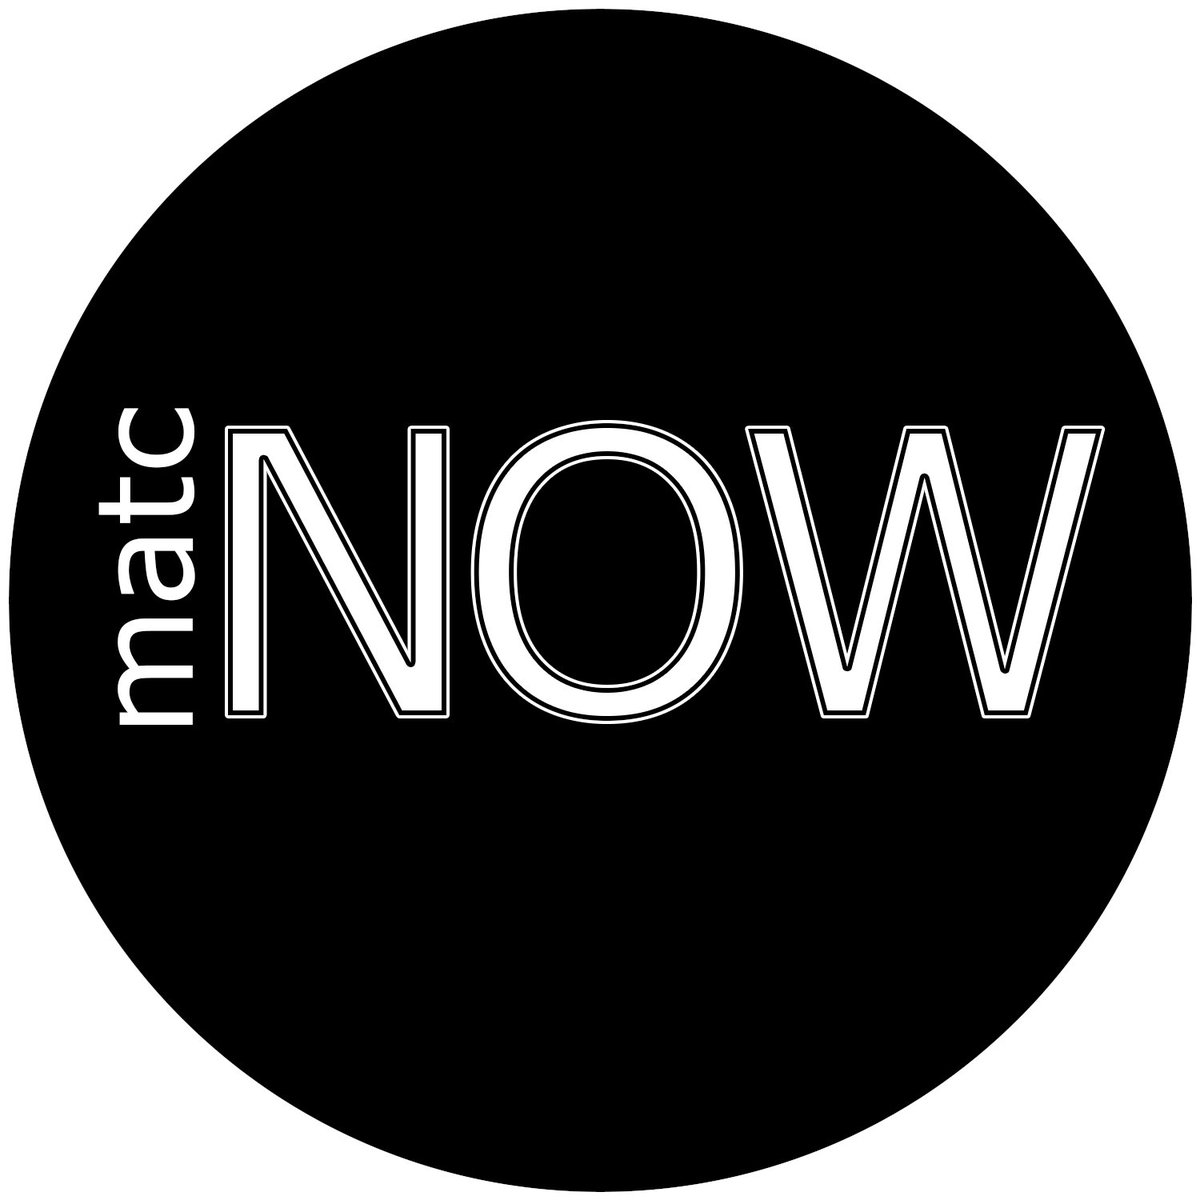 Don't miss today's episode of MATC Now! 3:30PM on milwaukeepbs.org/live The 8th season of MATC Now! continues and brings you some spooky stuff, in studio and out with our second episode of the semester. Set your notifications now!